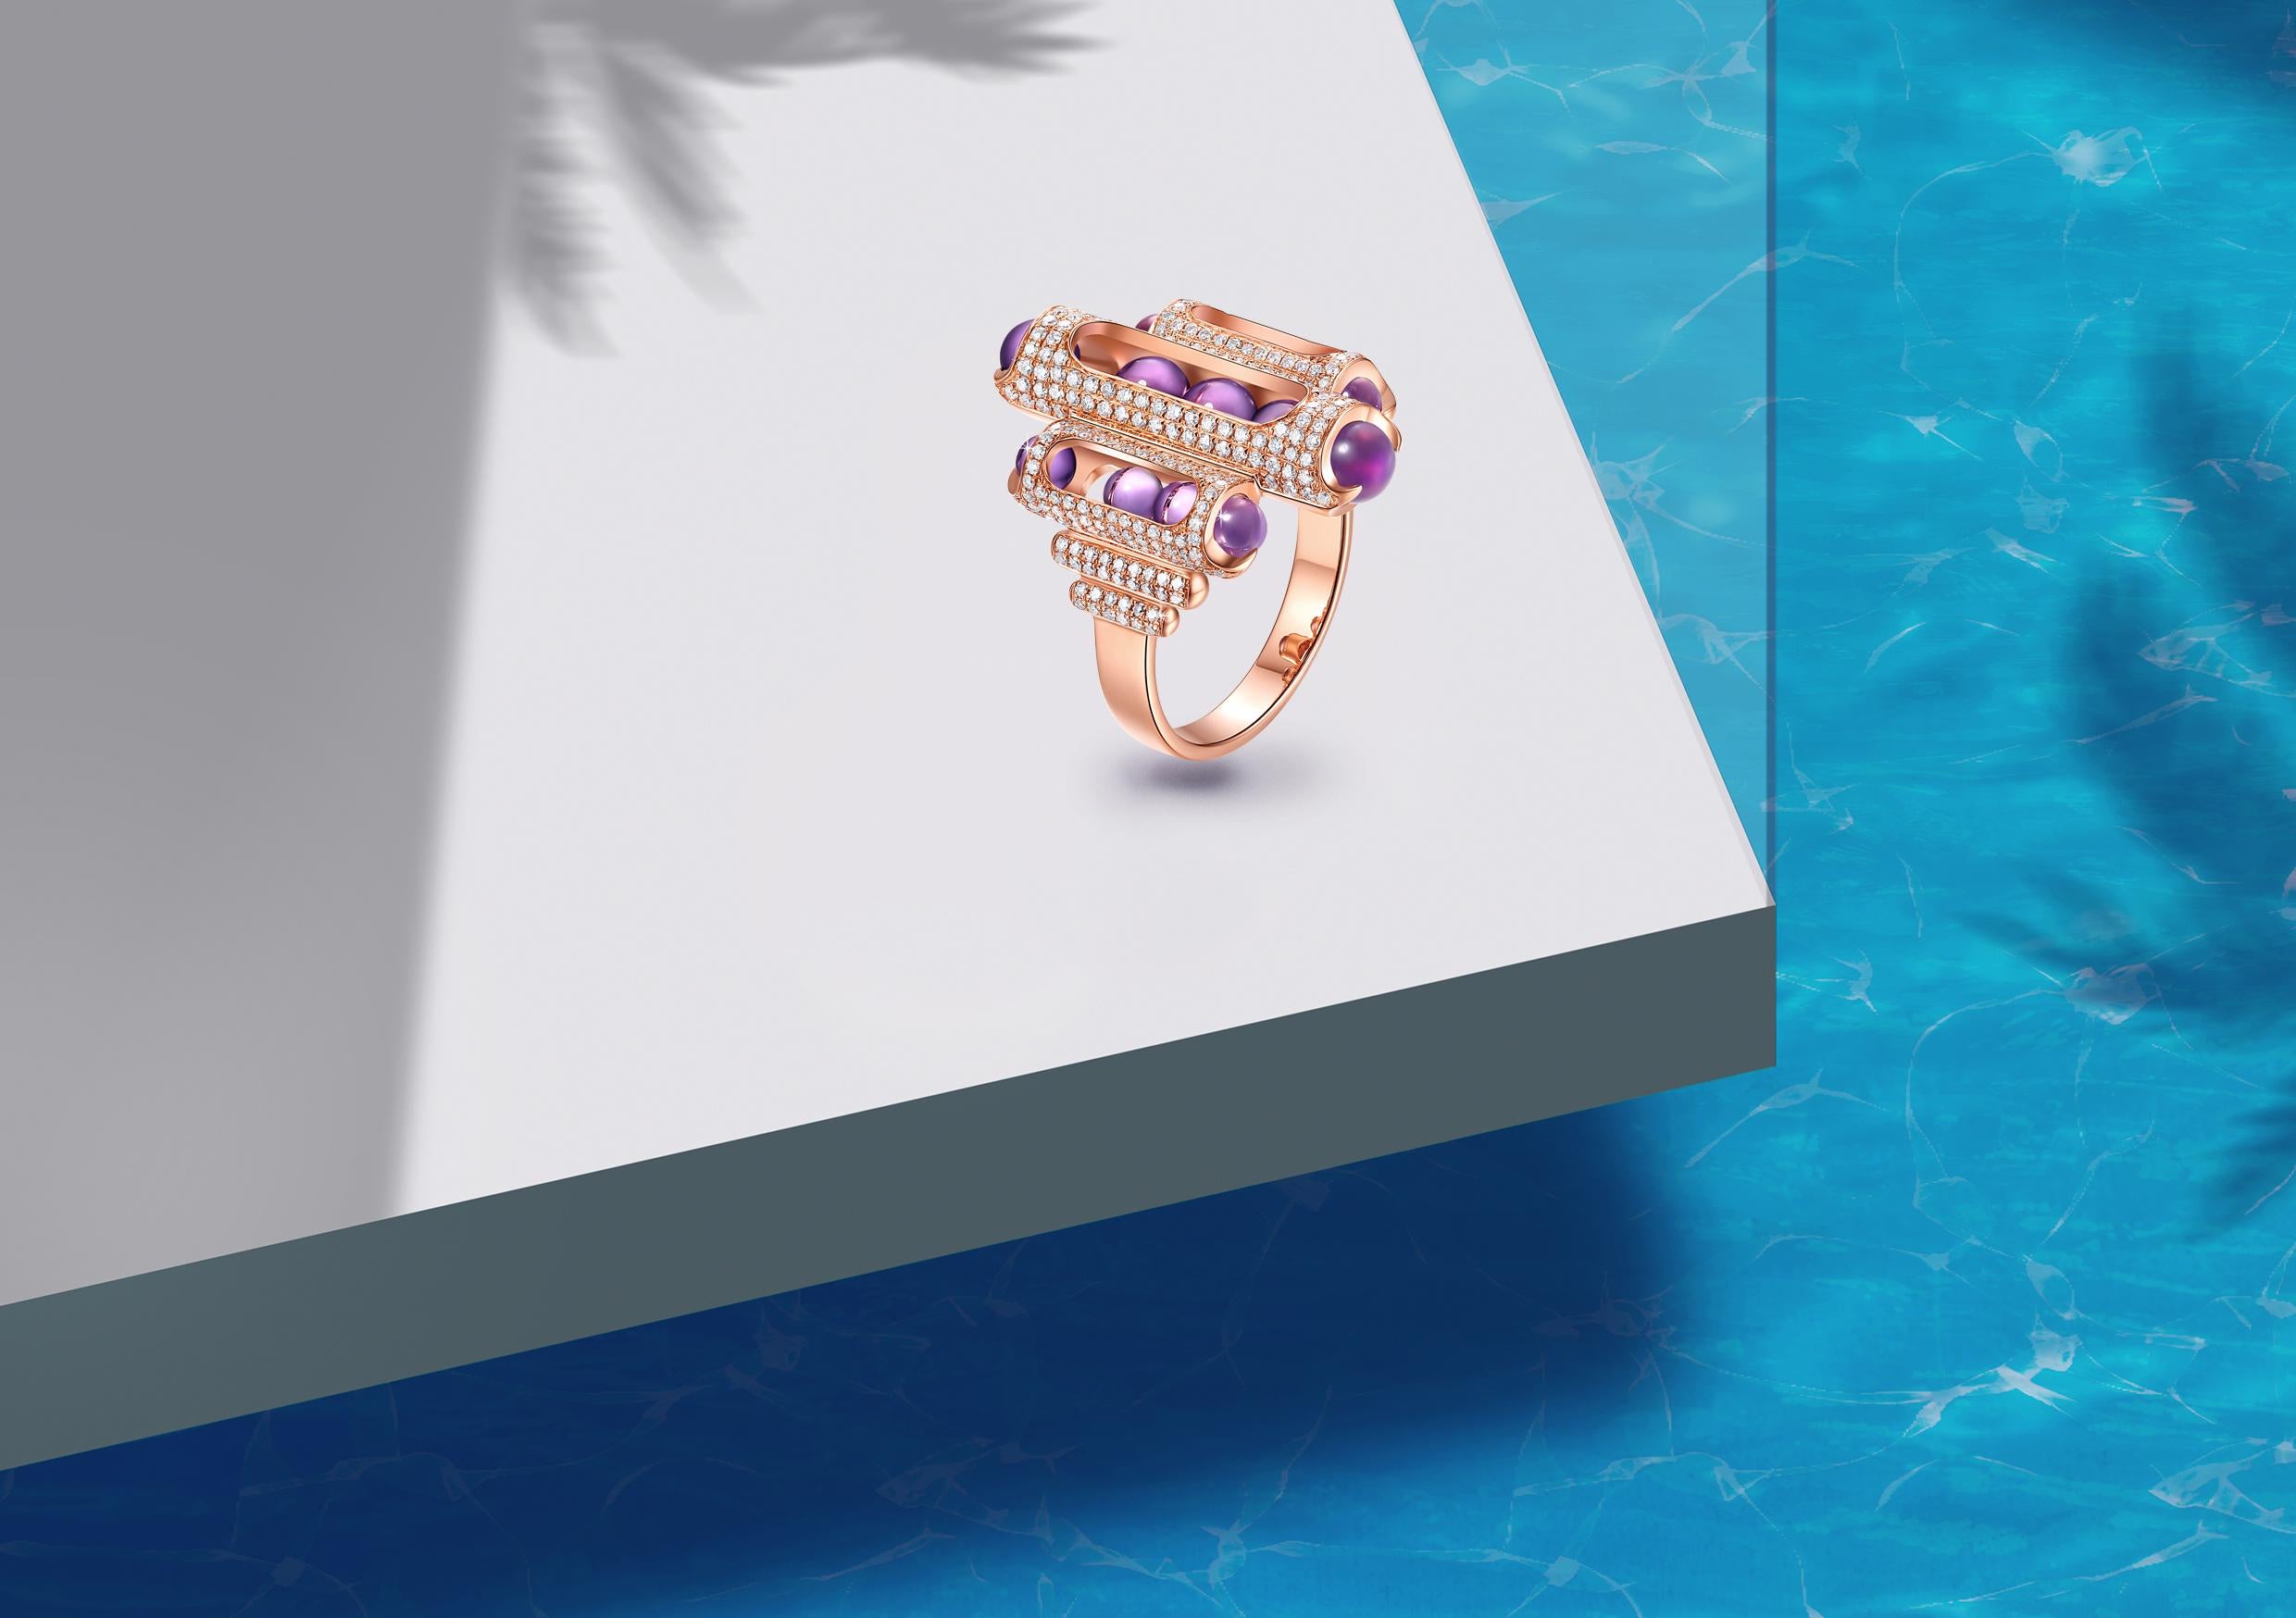 Melody collection won Boodles Gold Award at the Goldsmiths’ Craft & Design Awards, known as the UK ‘Jewellery Oscars’, 2019. This piece has been included in BB Publication's first ever jewellery edition coffee table book 2020: Spectacular and